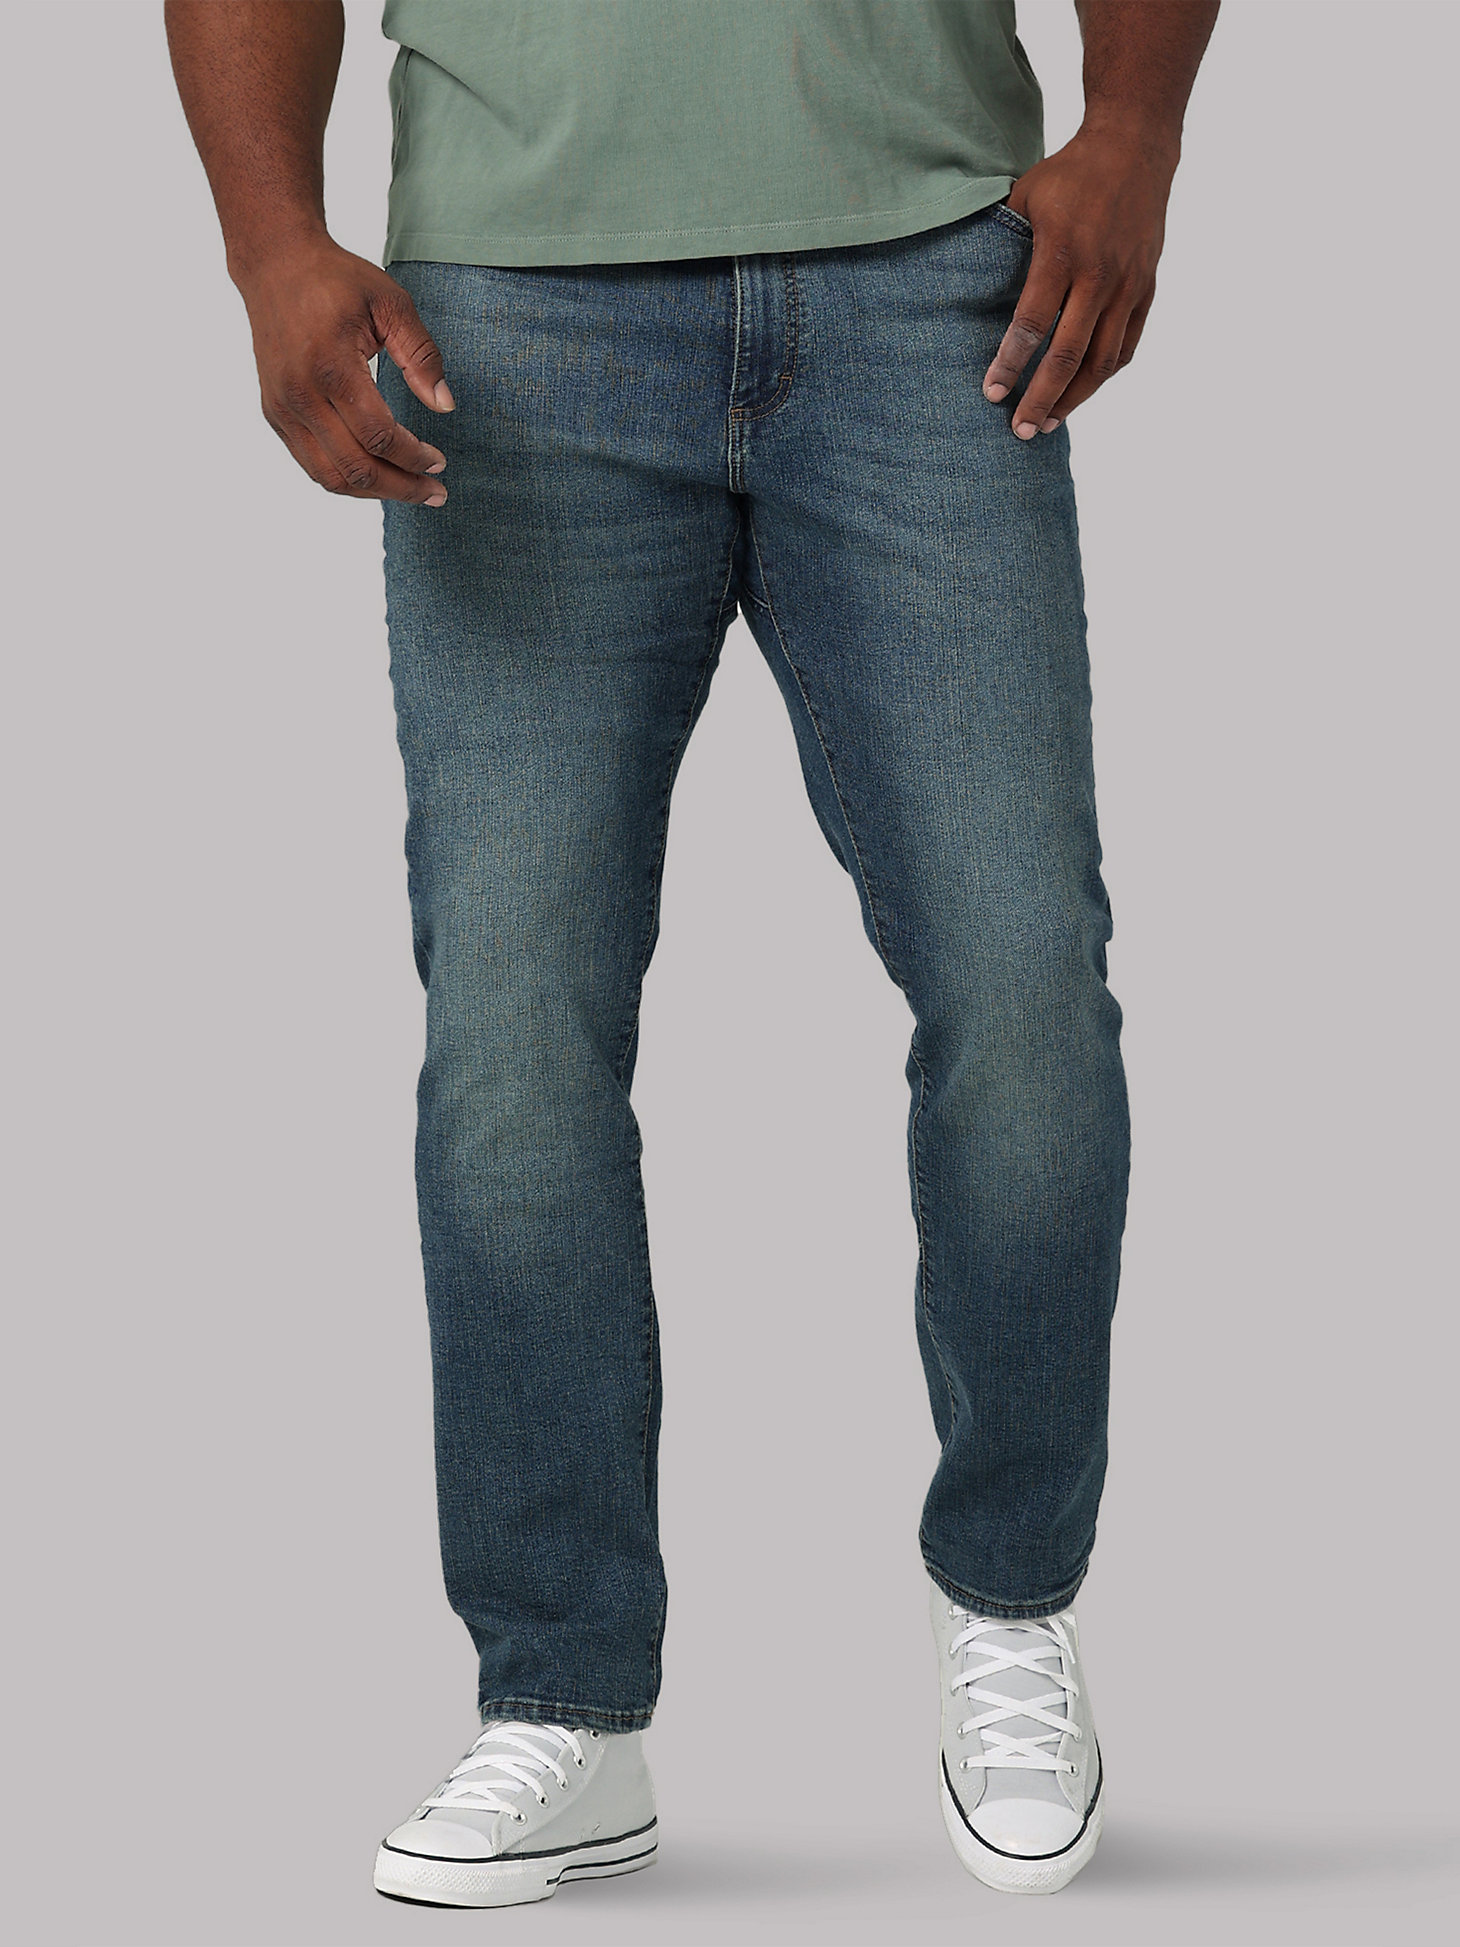 Lee Riders Indigo Mens Big & Tall Relaxed Fit Jean Jeans